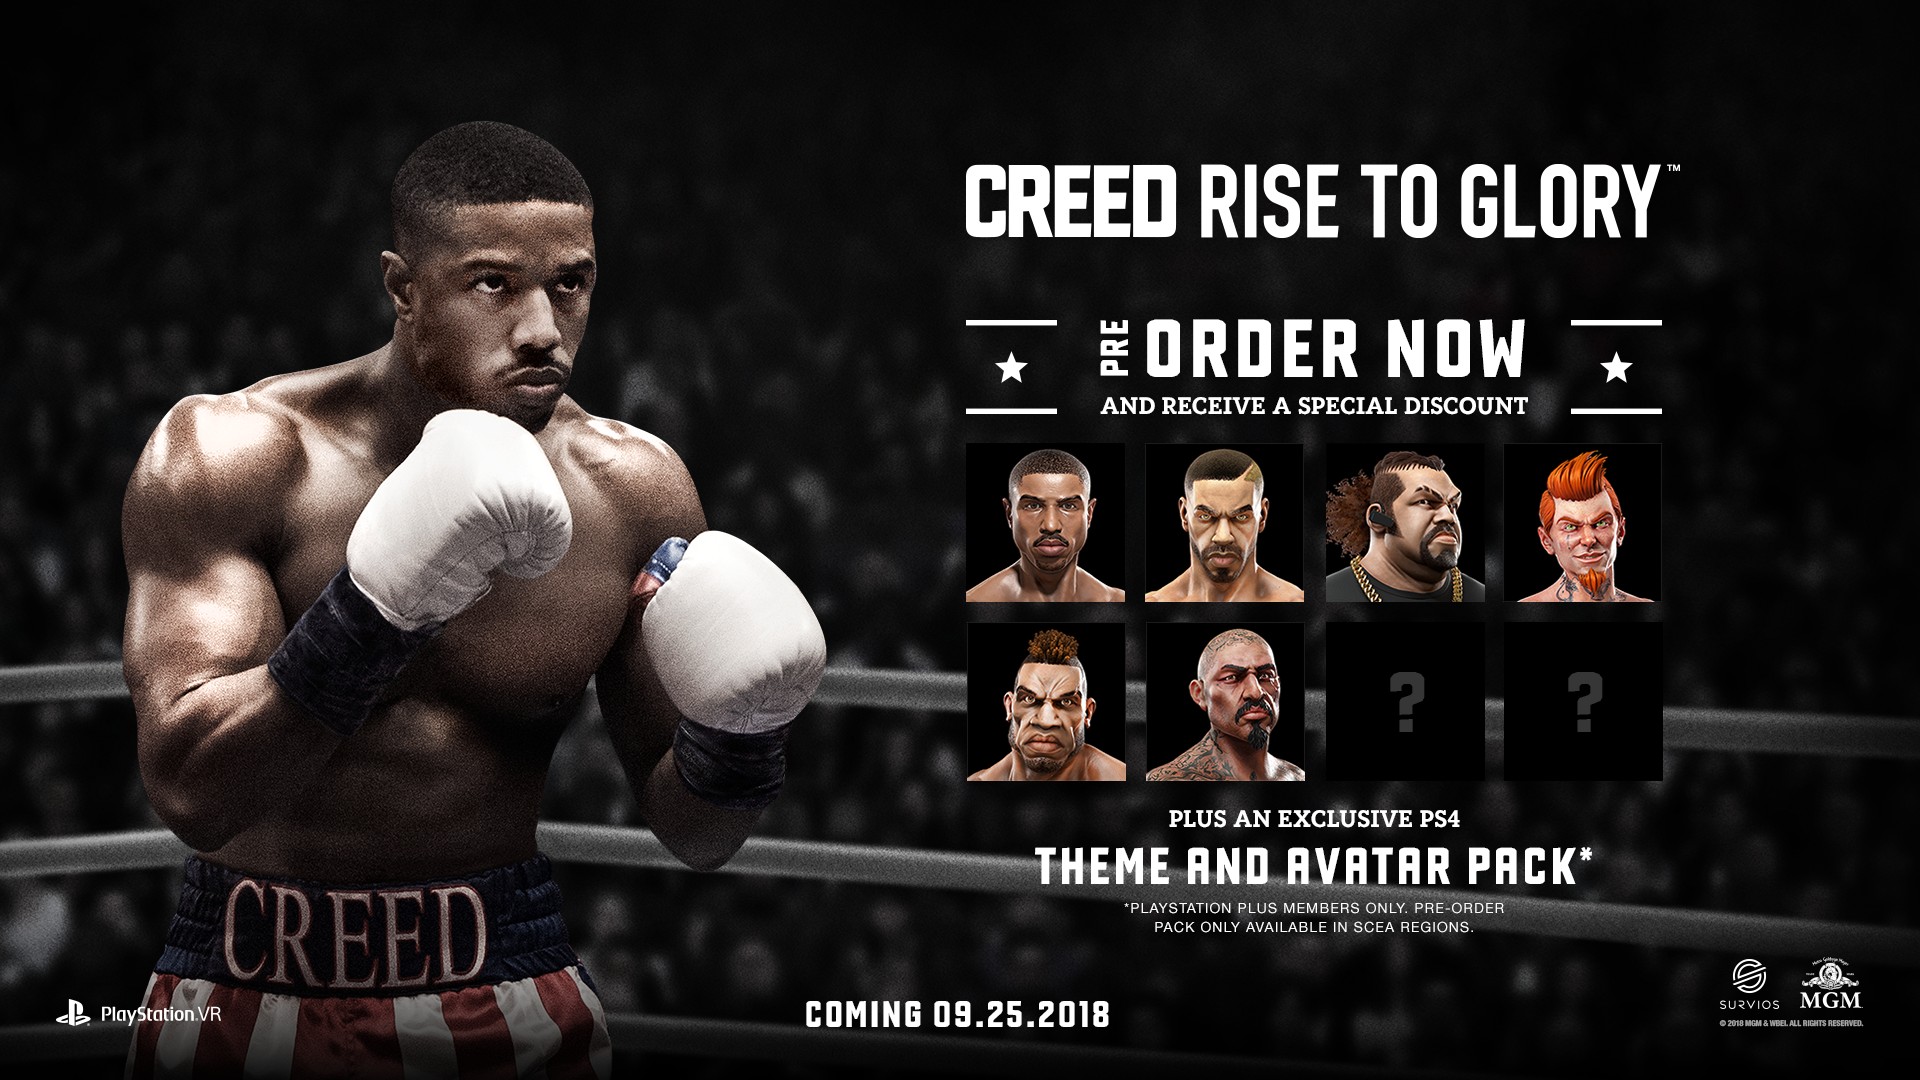 Creed glory vr. Creed VR игра. Creed Rise to Glory ps4. Creed: Rise to Glory™ VR. Бокс VR Creed.